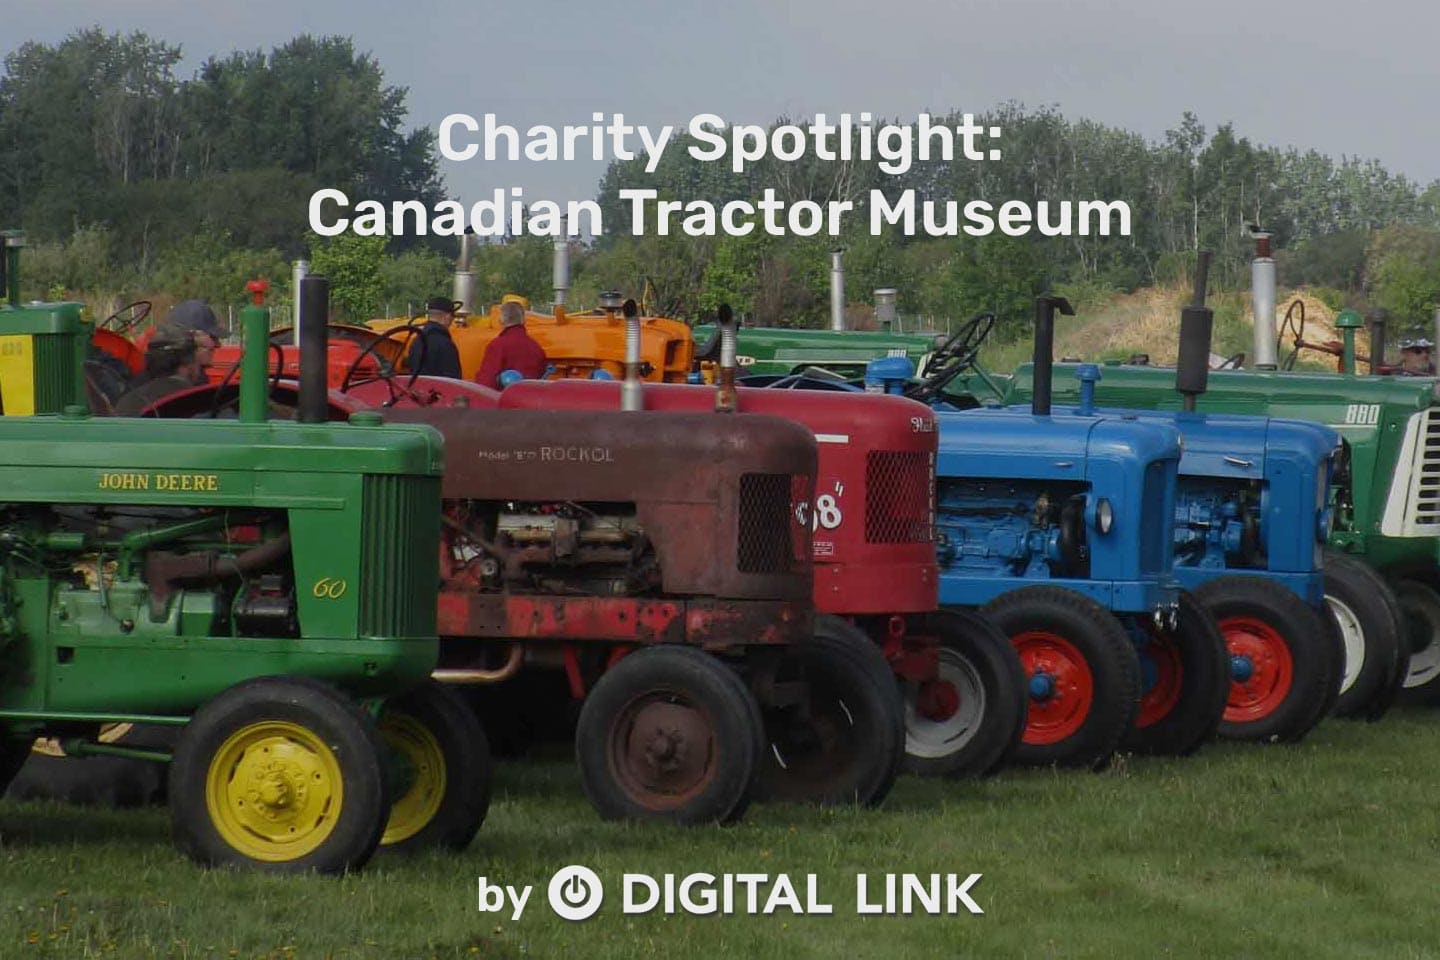 Charity Spotlight on Canadian Tractor Museum